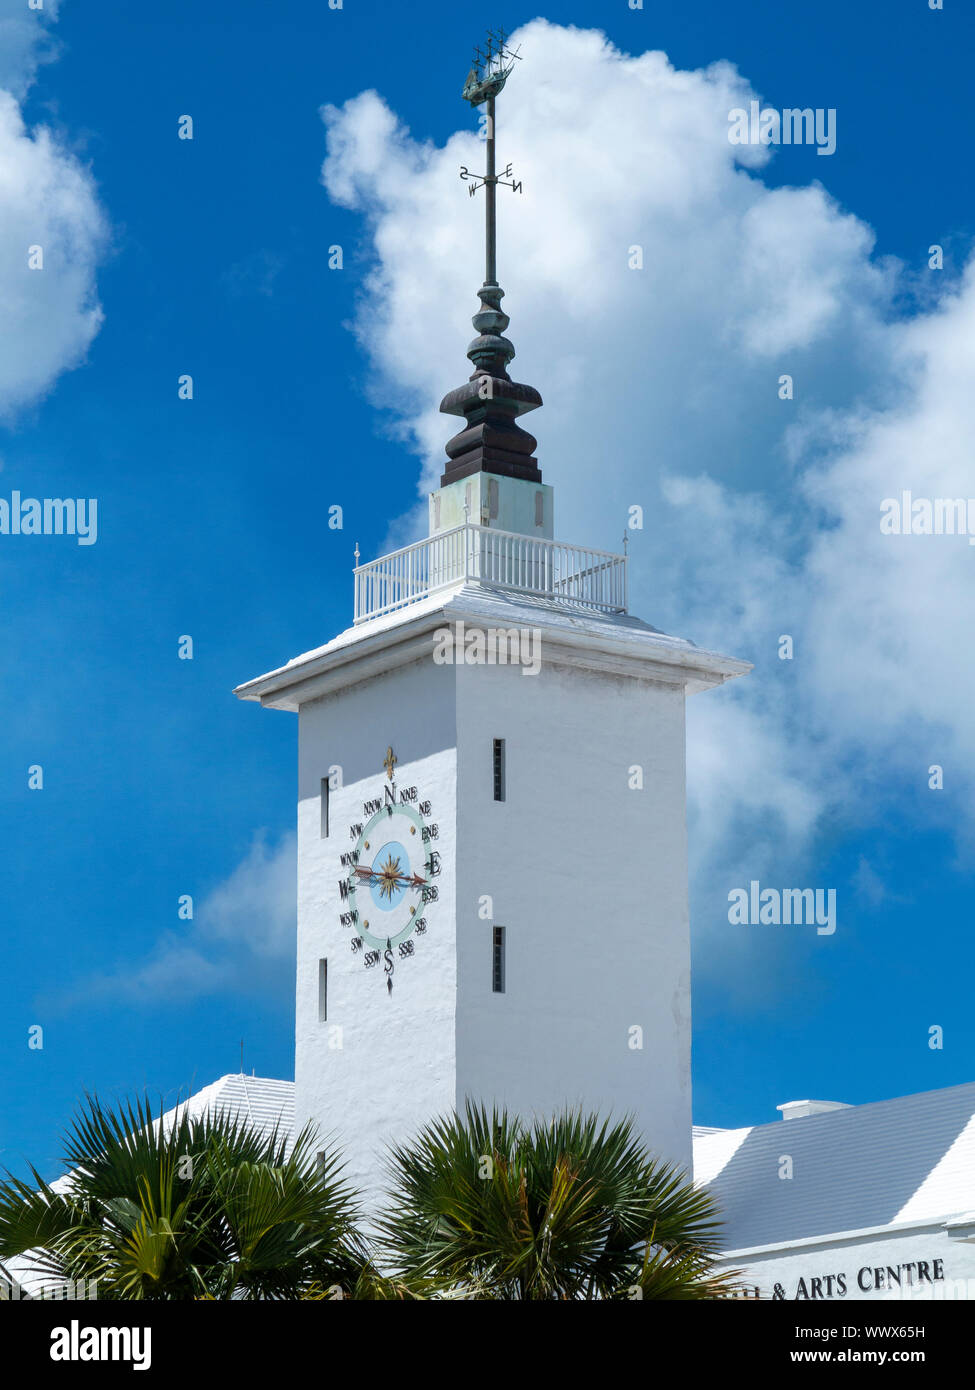 The clock tower of Hamilton City Hall and Arts Centre, Hamilton, Bermuda against a blue sky and white clouds Stock Photo